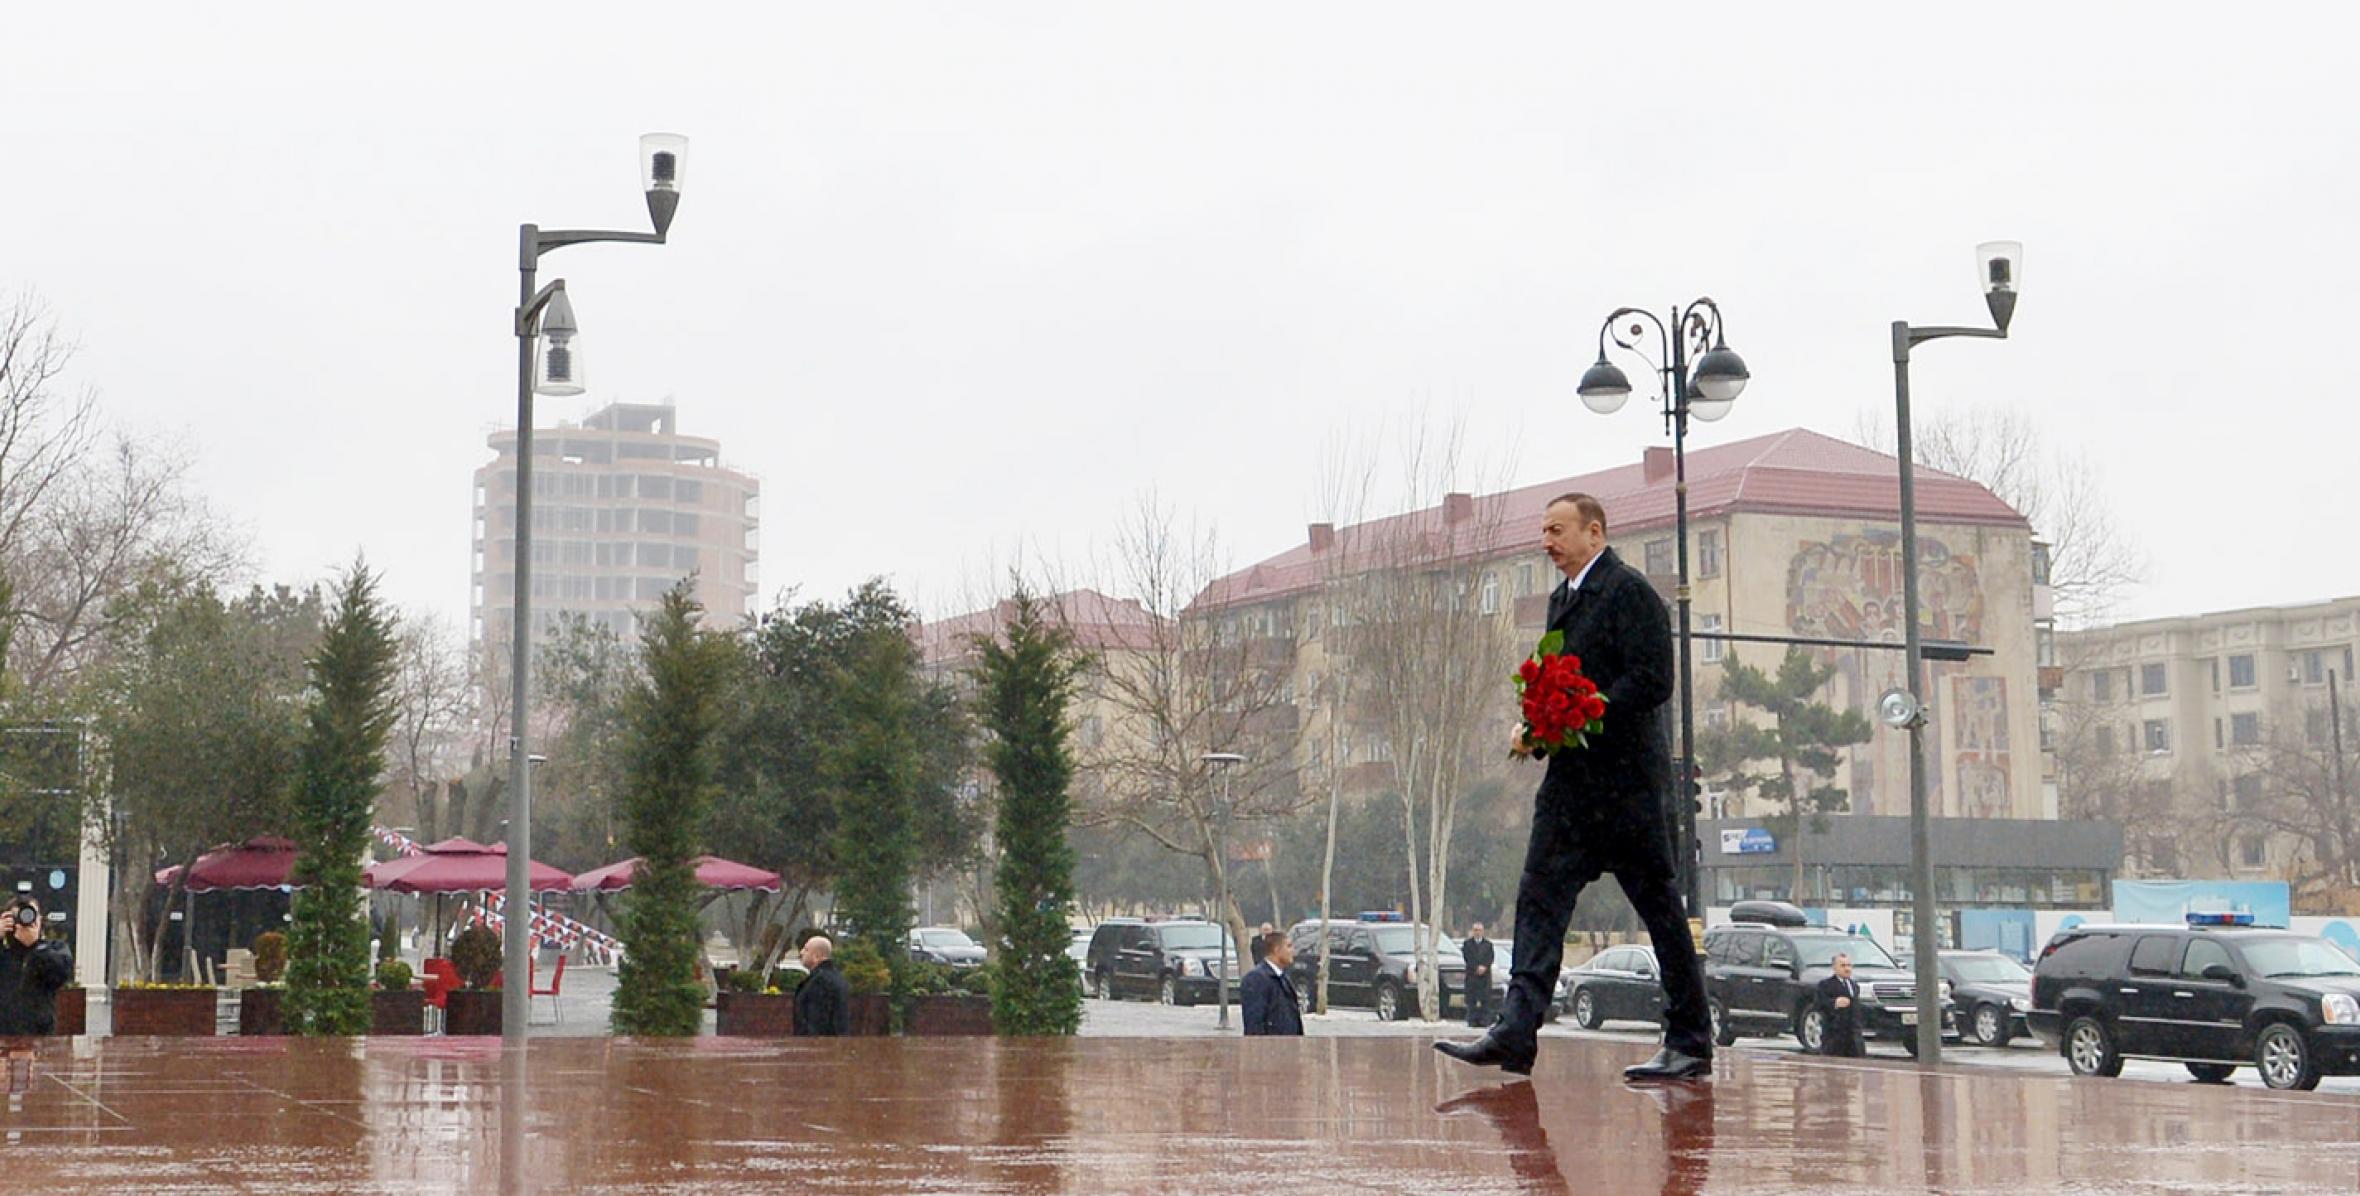 Ilham Aliyev arrived in the city of Sumgayit